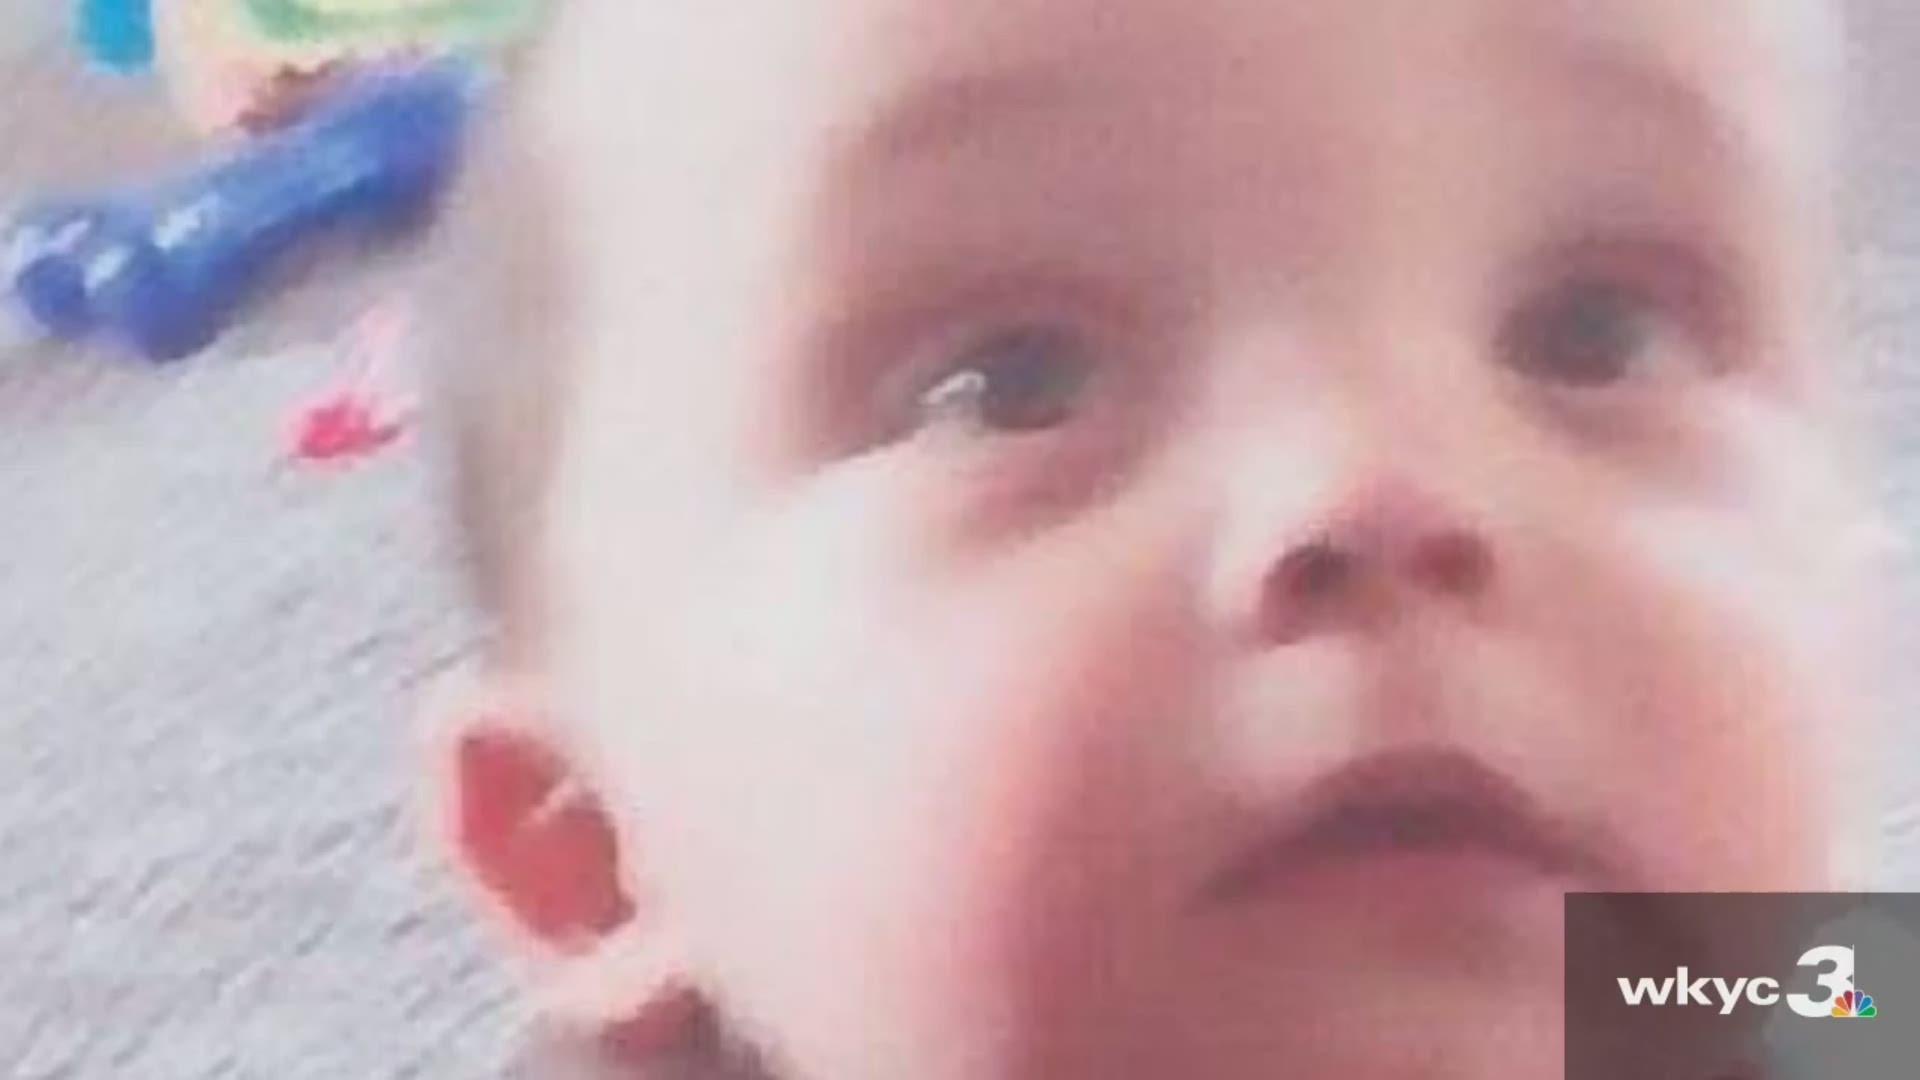 A missing 14-month-old boy was found safe with his mother early Tuesday morning.